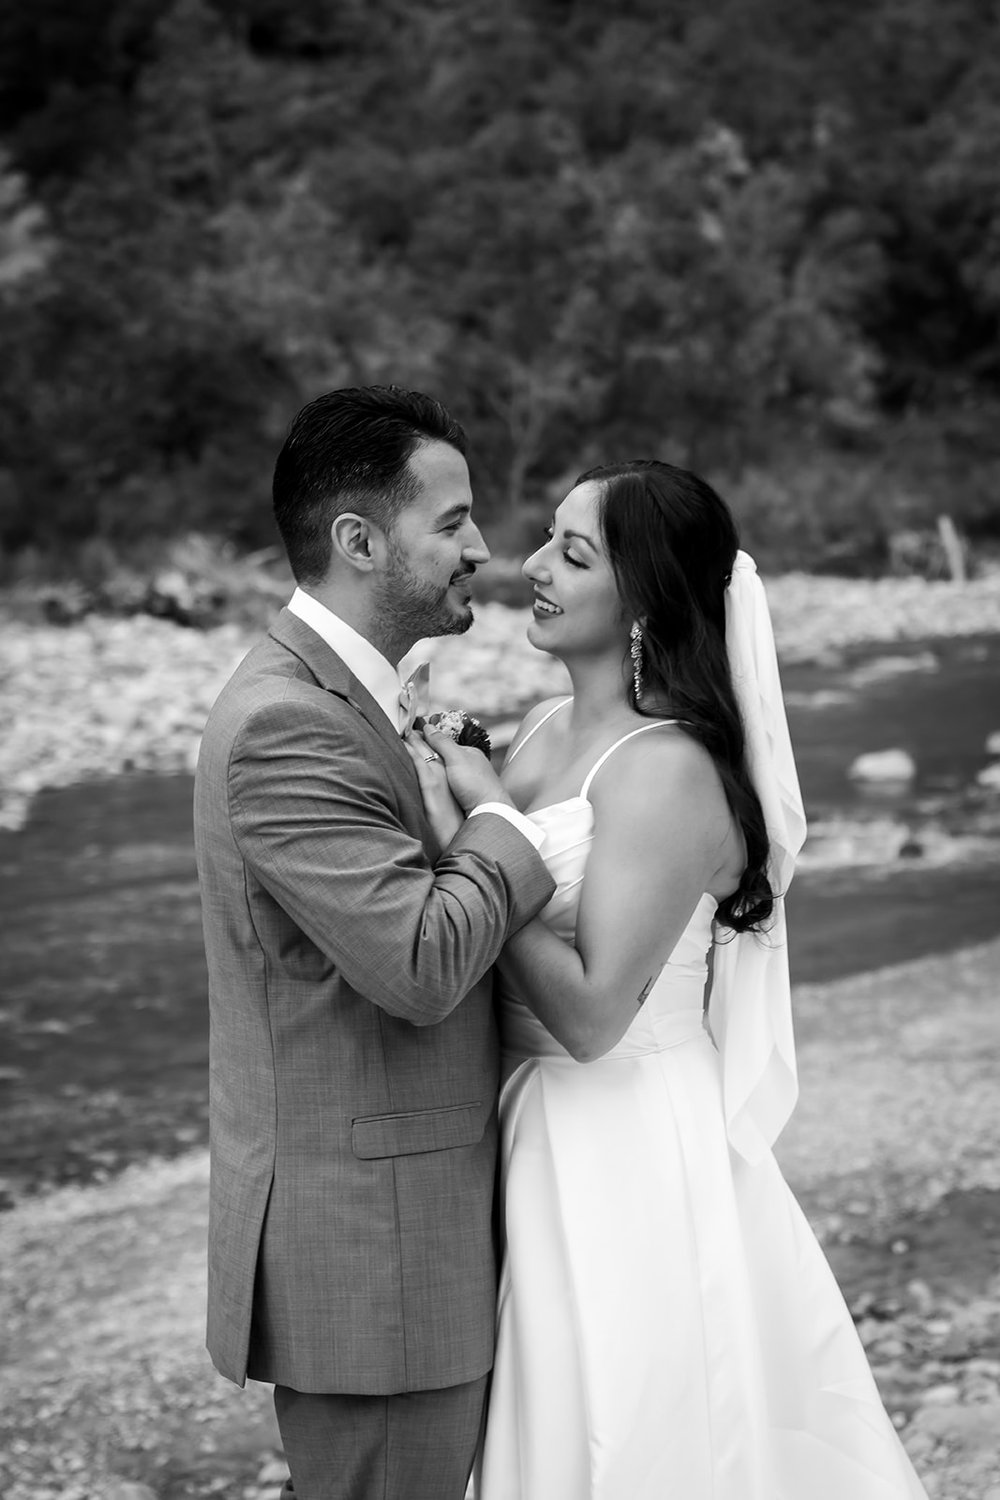  Black and White Image of the bride and groom at Zion National Park 